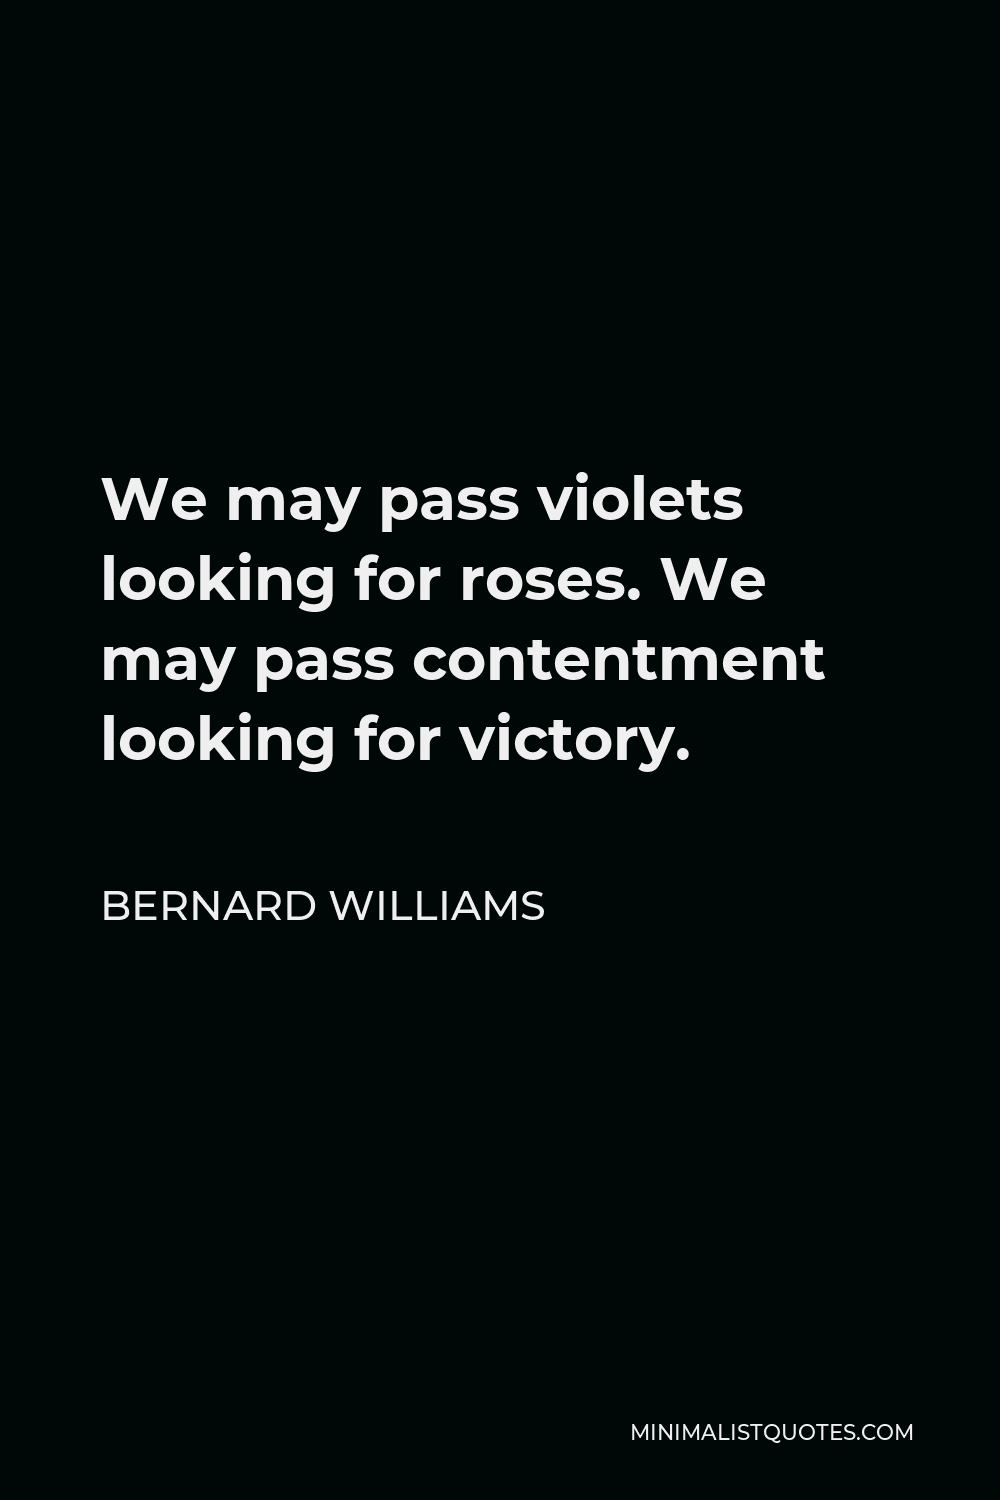 Bernard Williams Quote - We may pass violets looking for roses. We may pass contentment looking for victory.